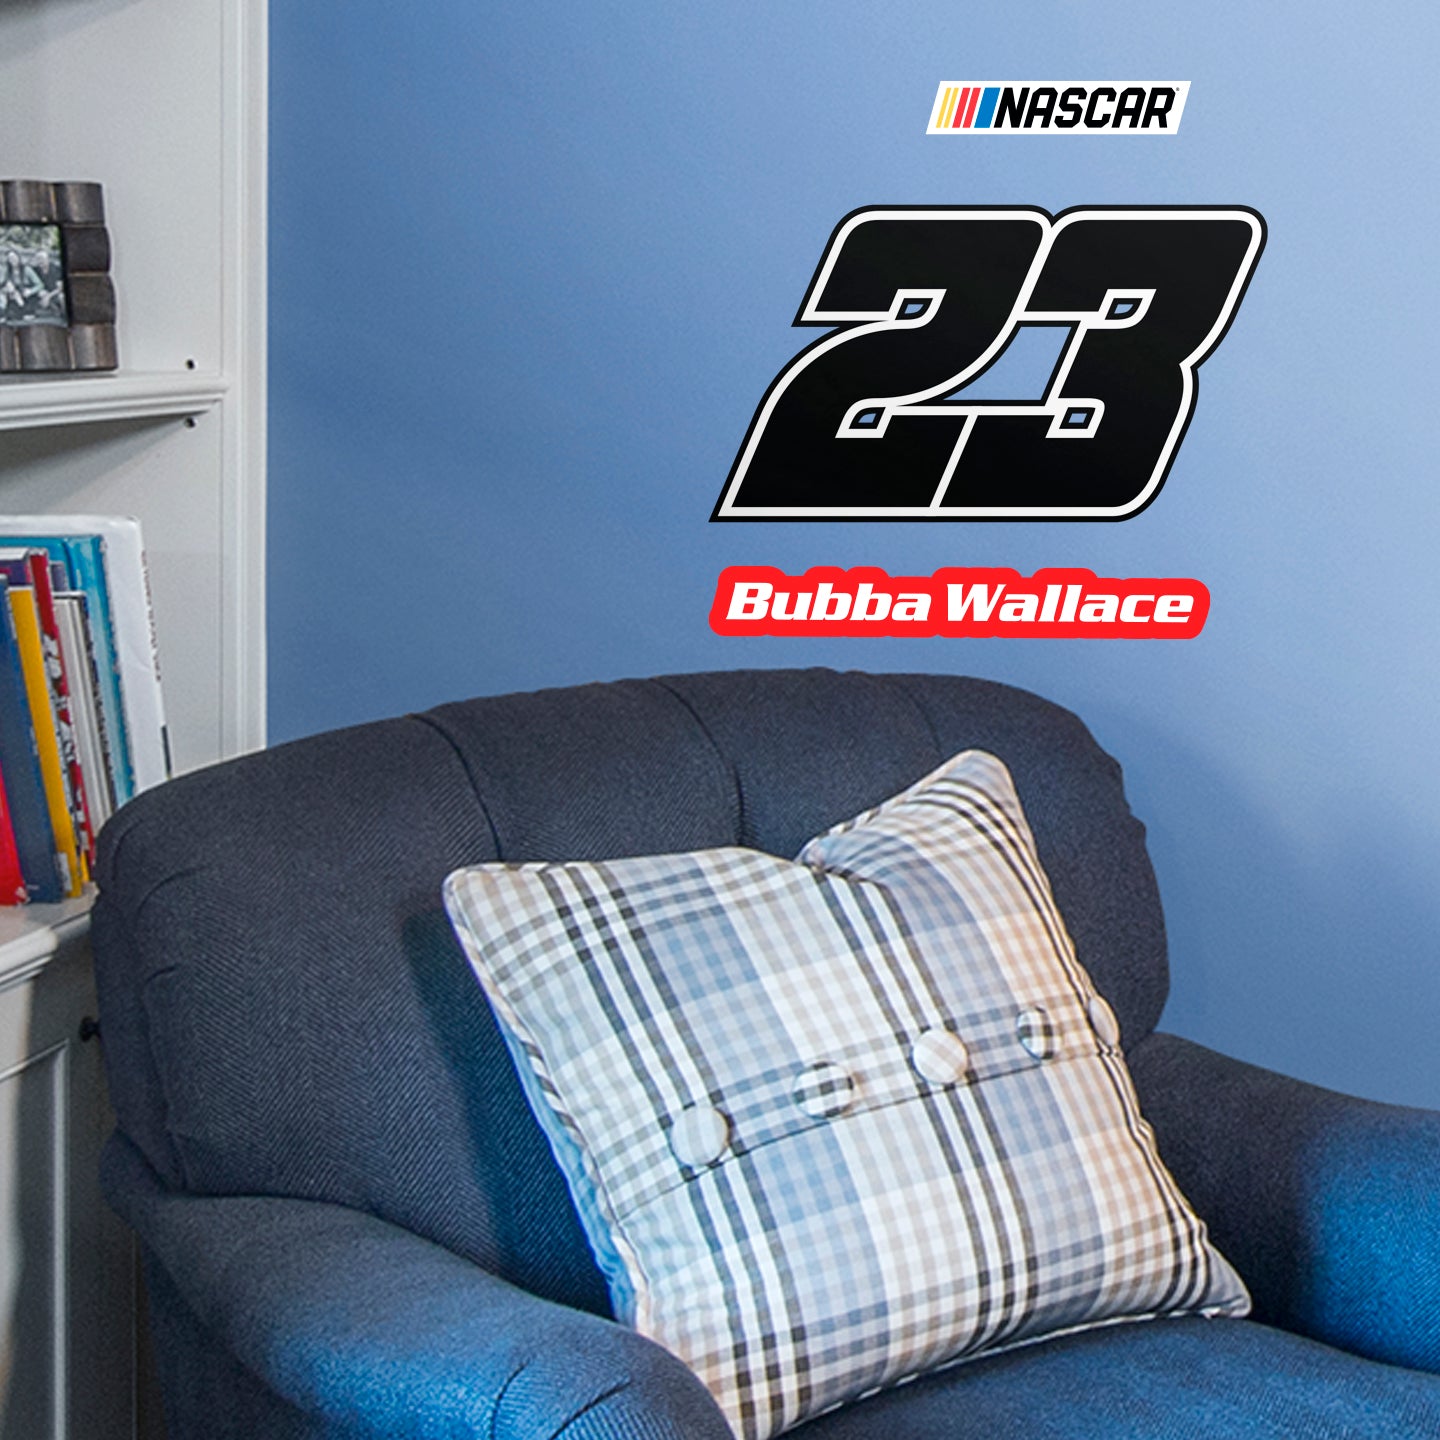 Bubba Wallace 2021 #23 Logo - Officially Licensed NASCAR Removable Wall Decal Large by Fathead | Vinyl